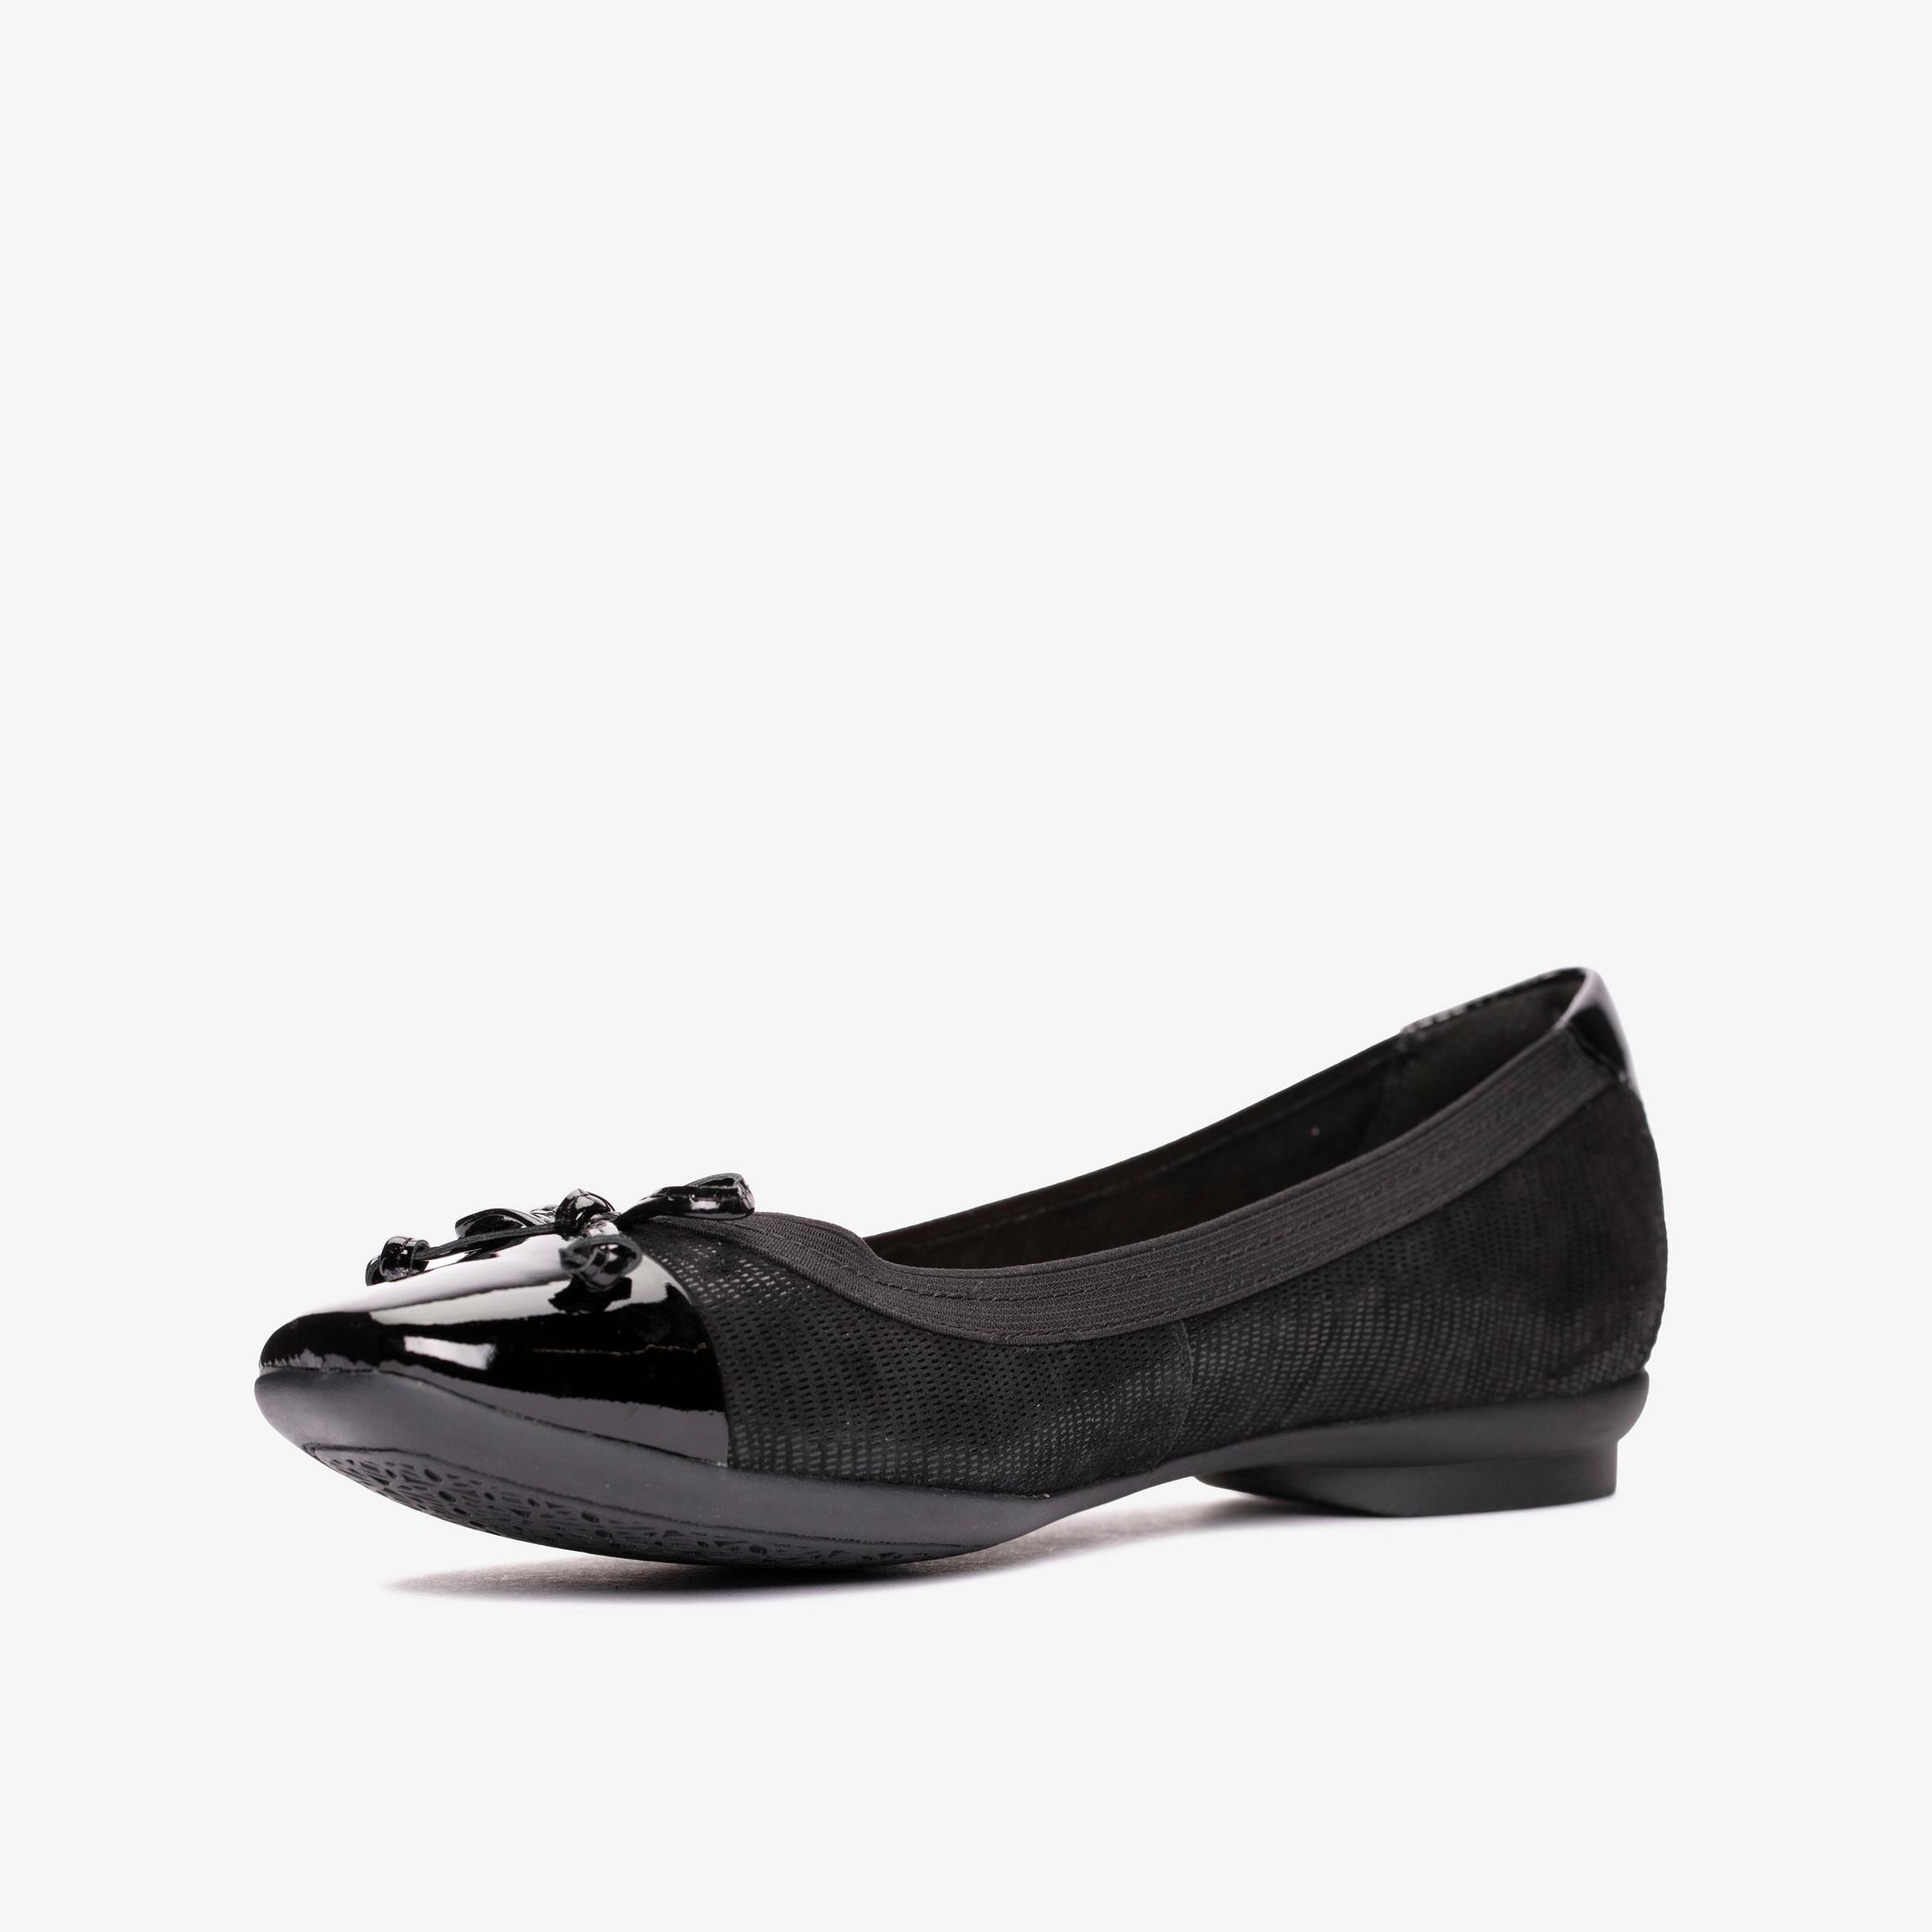 Candra Glow Black Suede Slip Ons, view 4 of 6